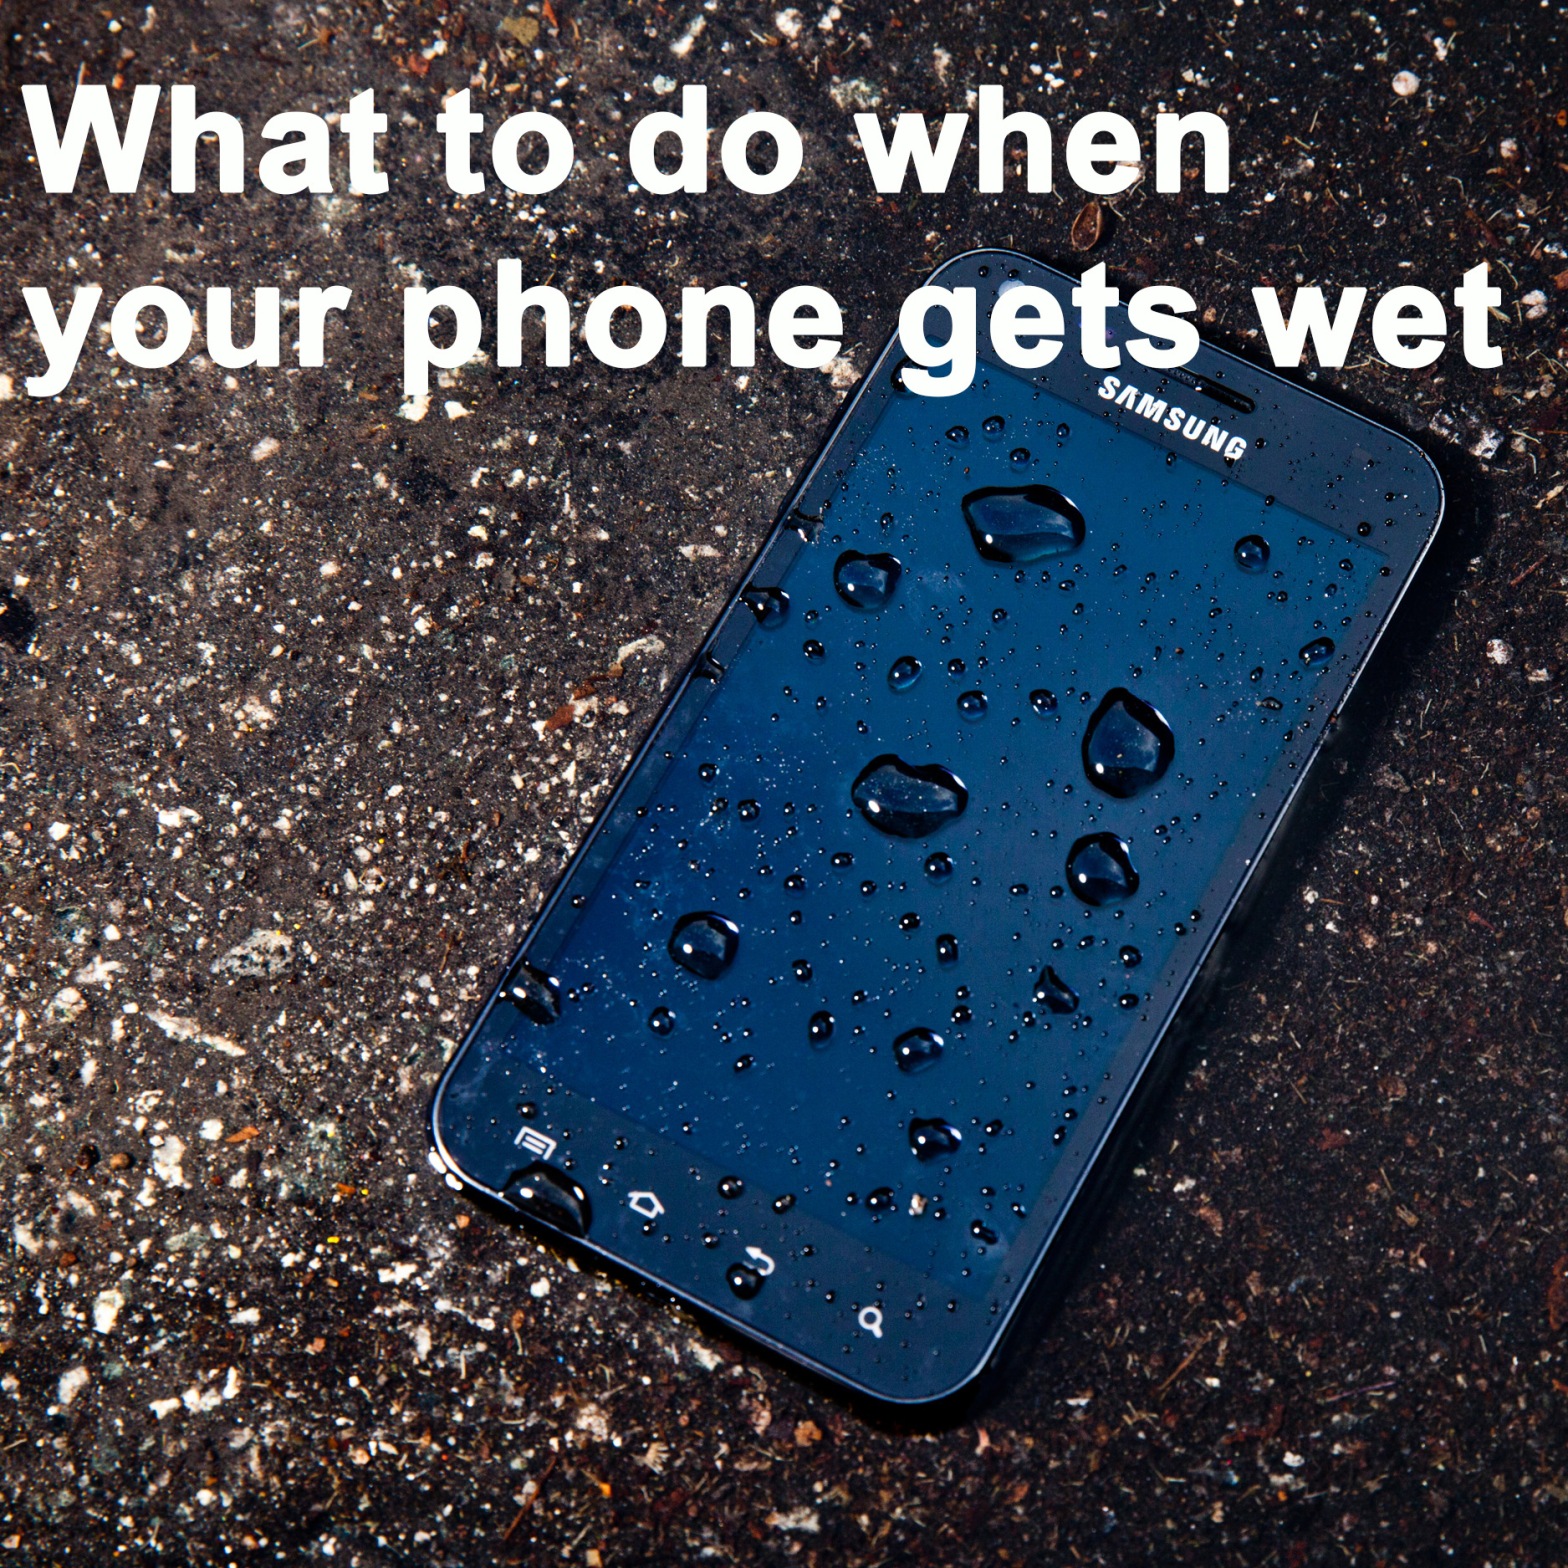 What to do when your phone gets wet (without Rice) - How To Get Water Out Of Your Phone Without Rice